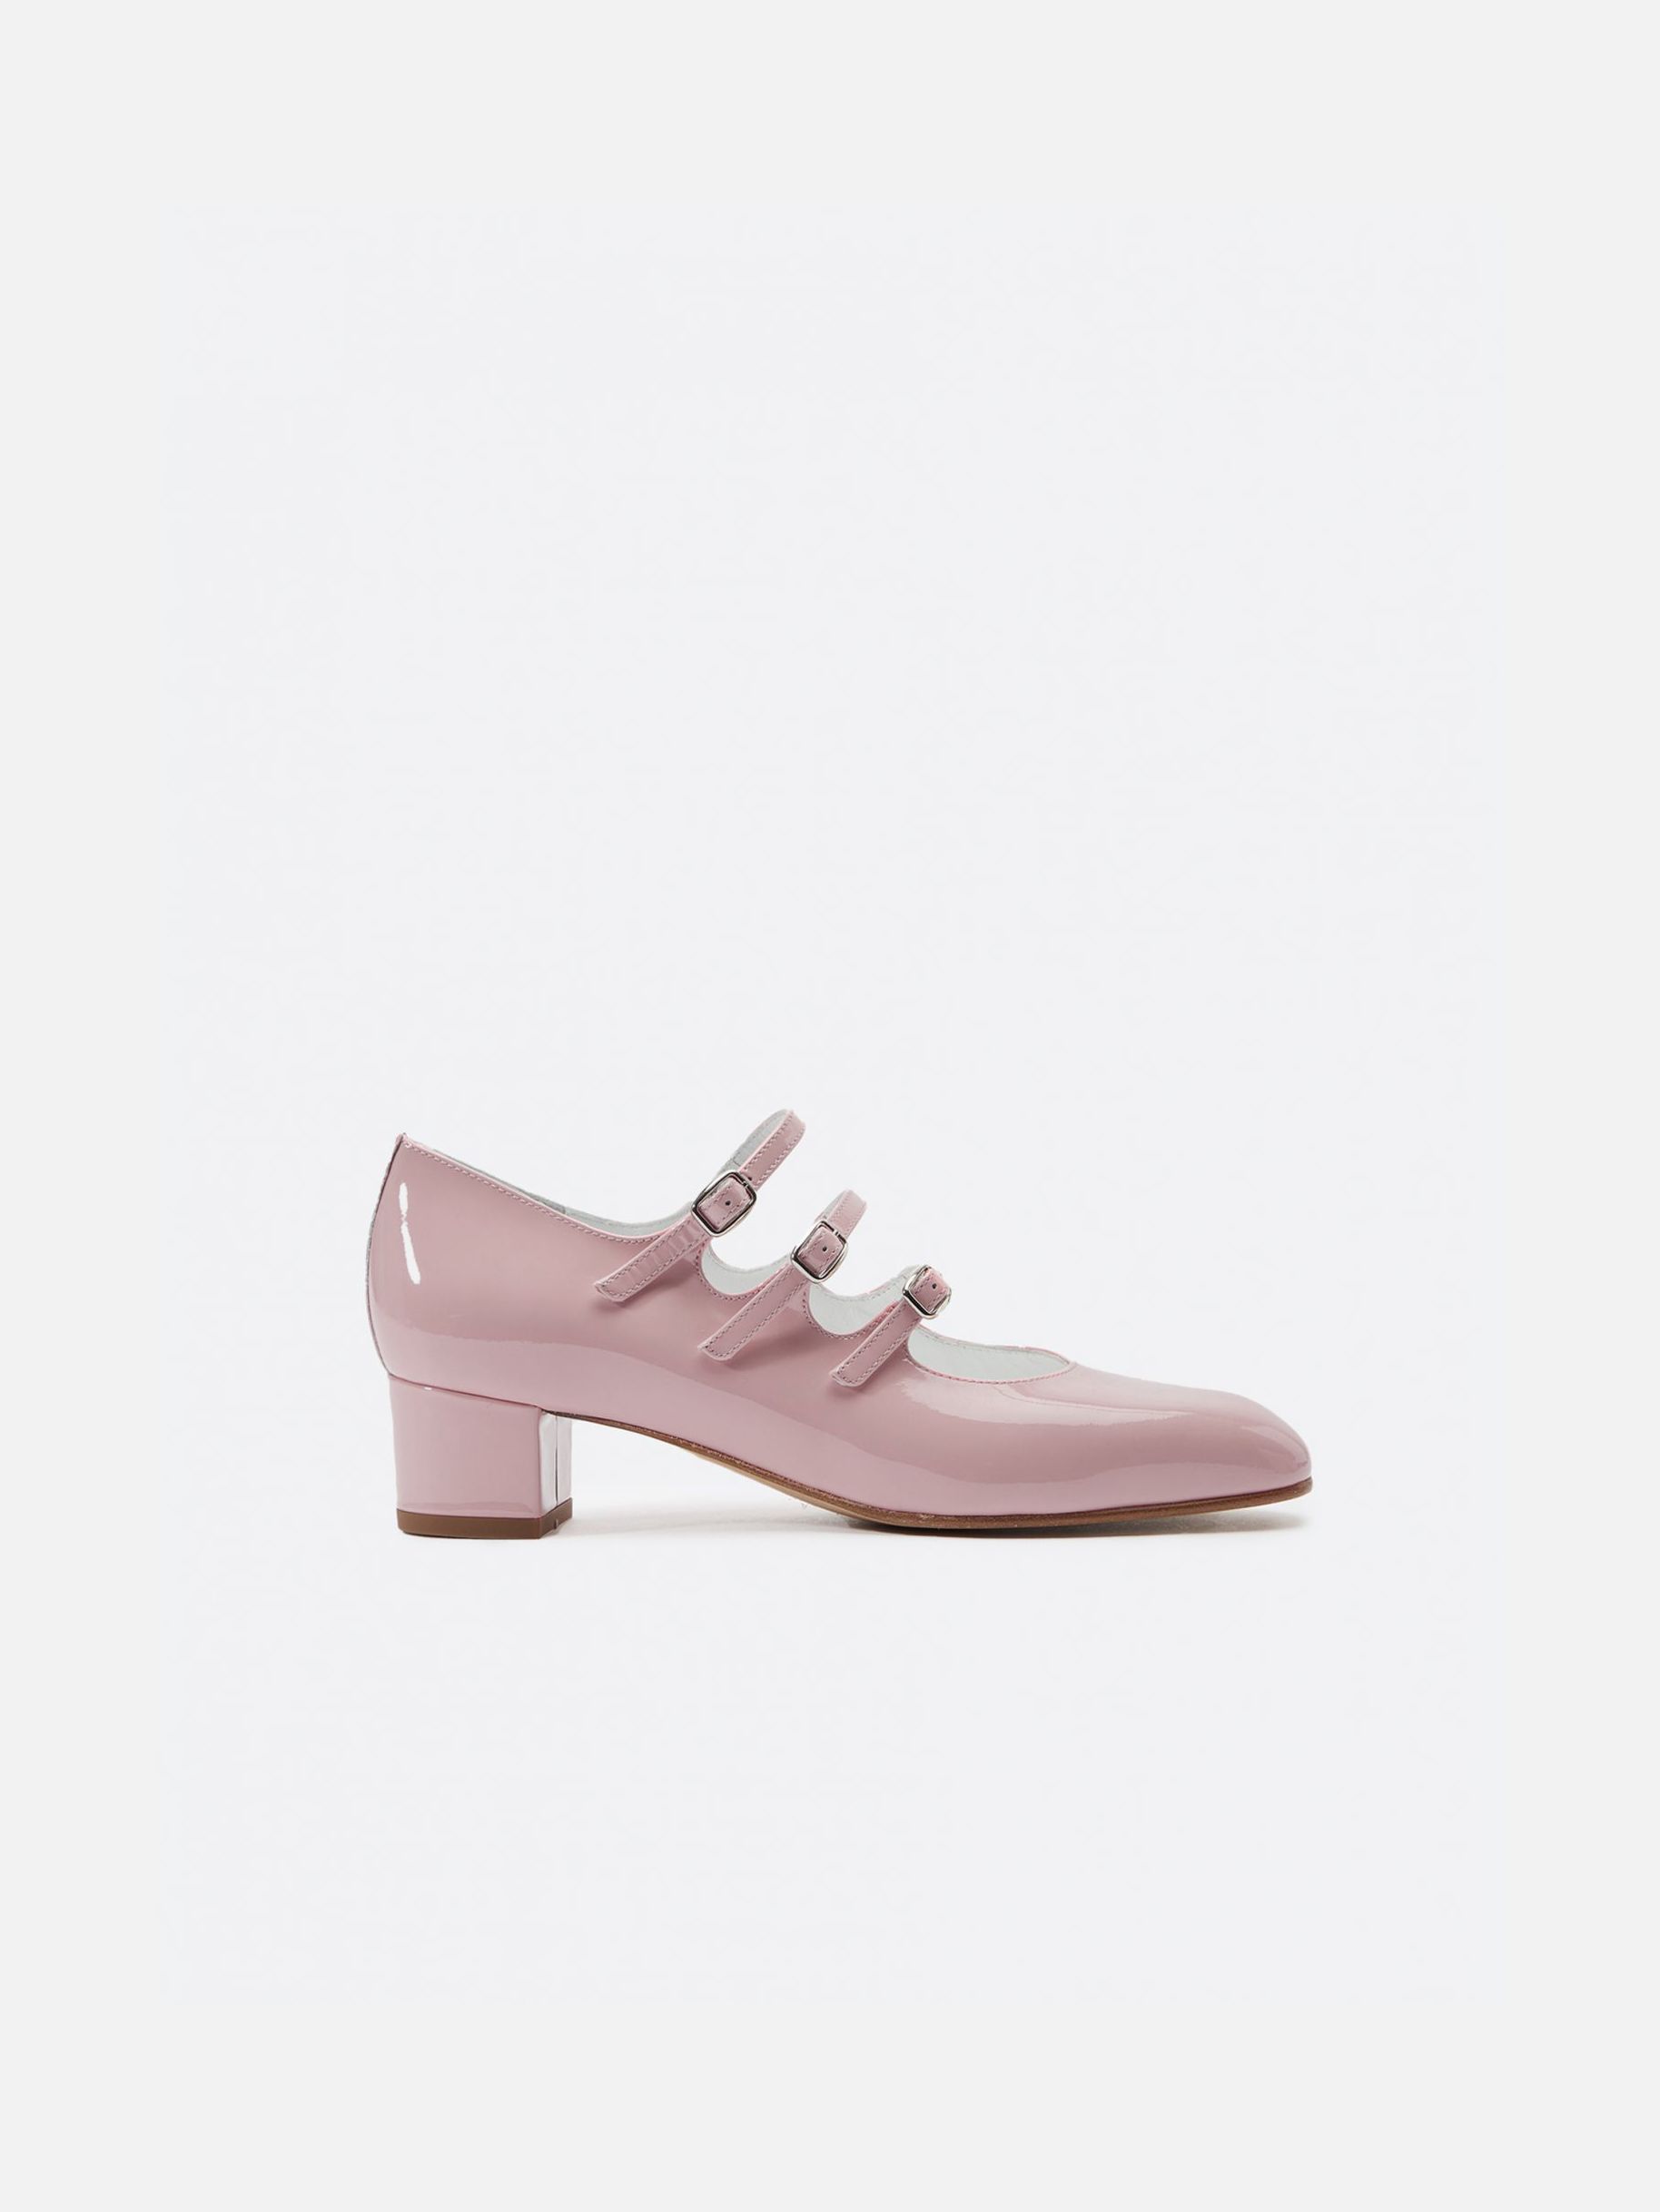 KINA Pink patent upcycled leather Mary Janes | Carel Paris Shoes